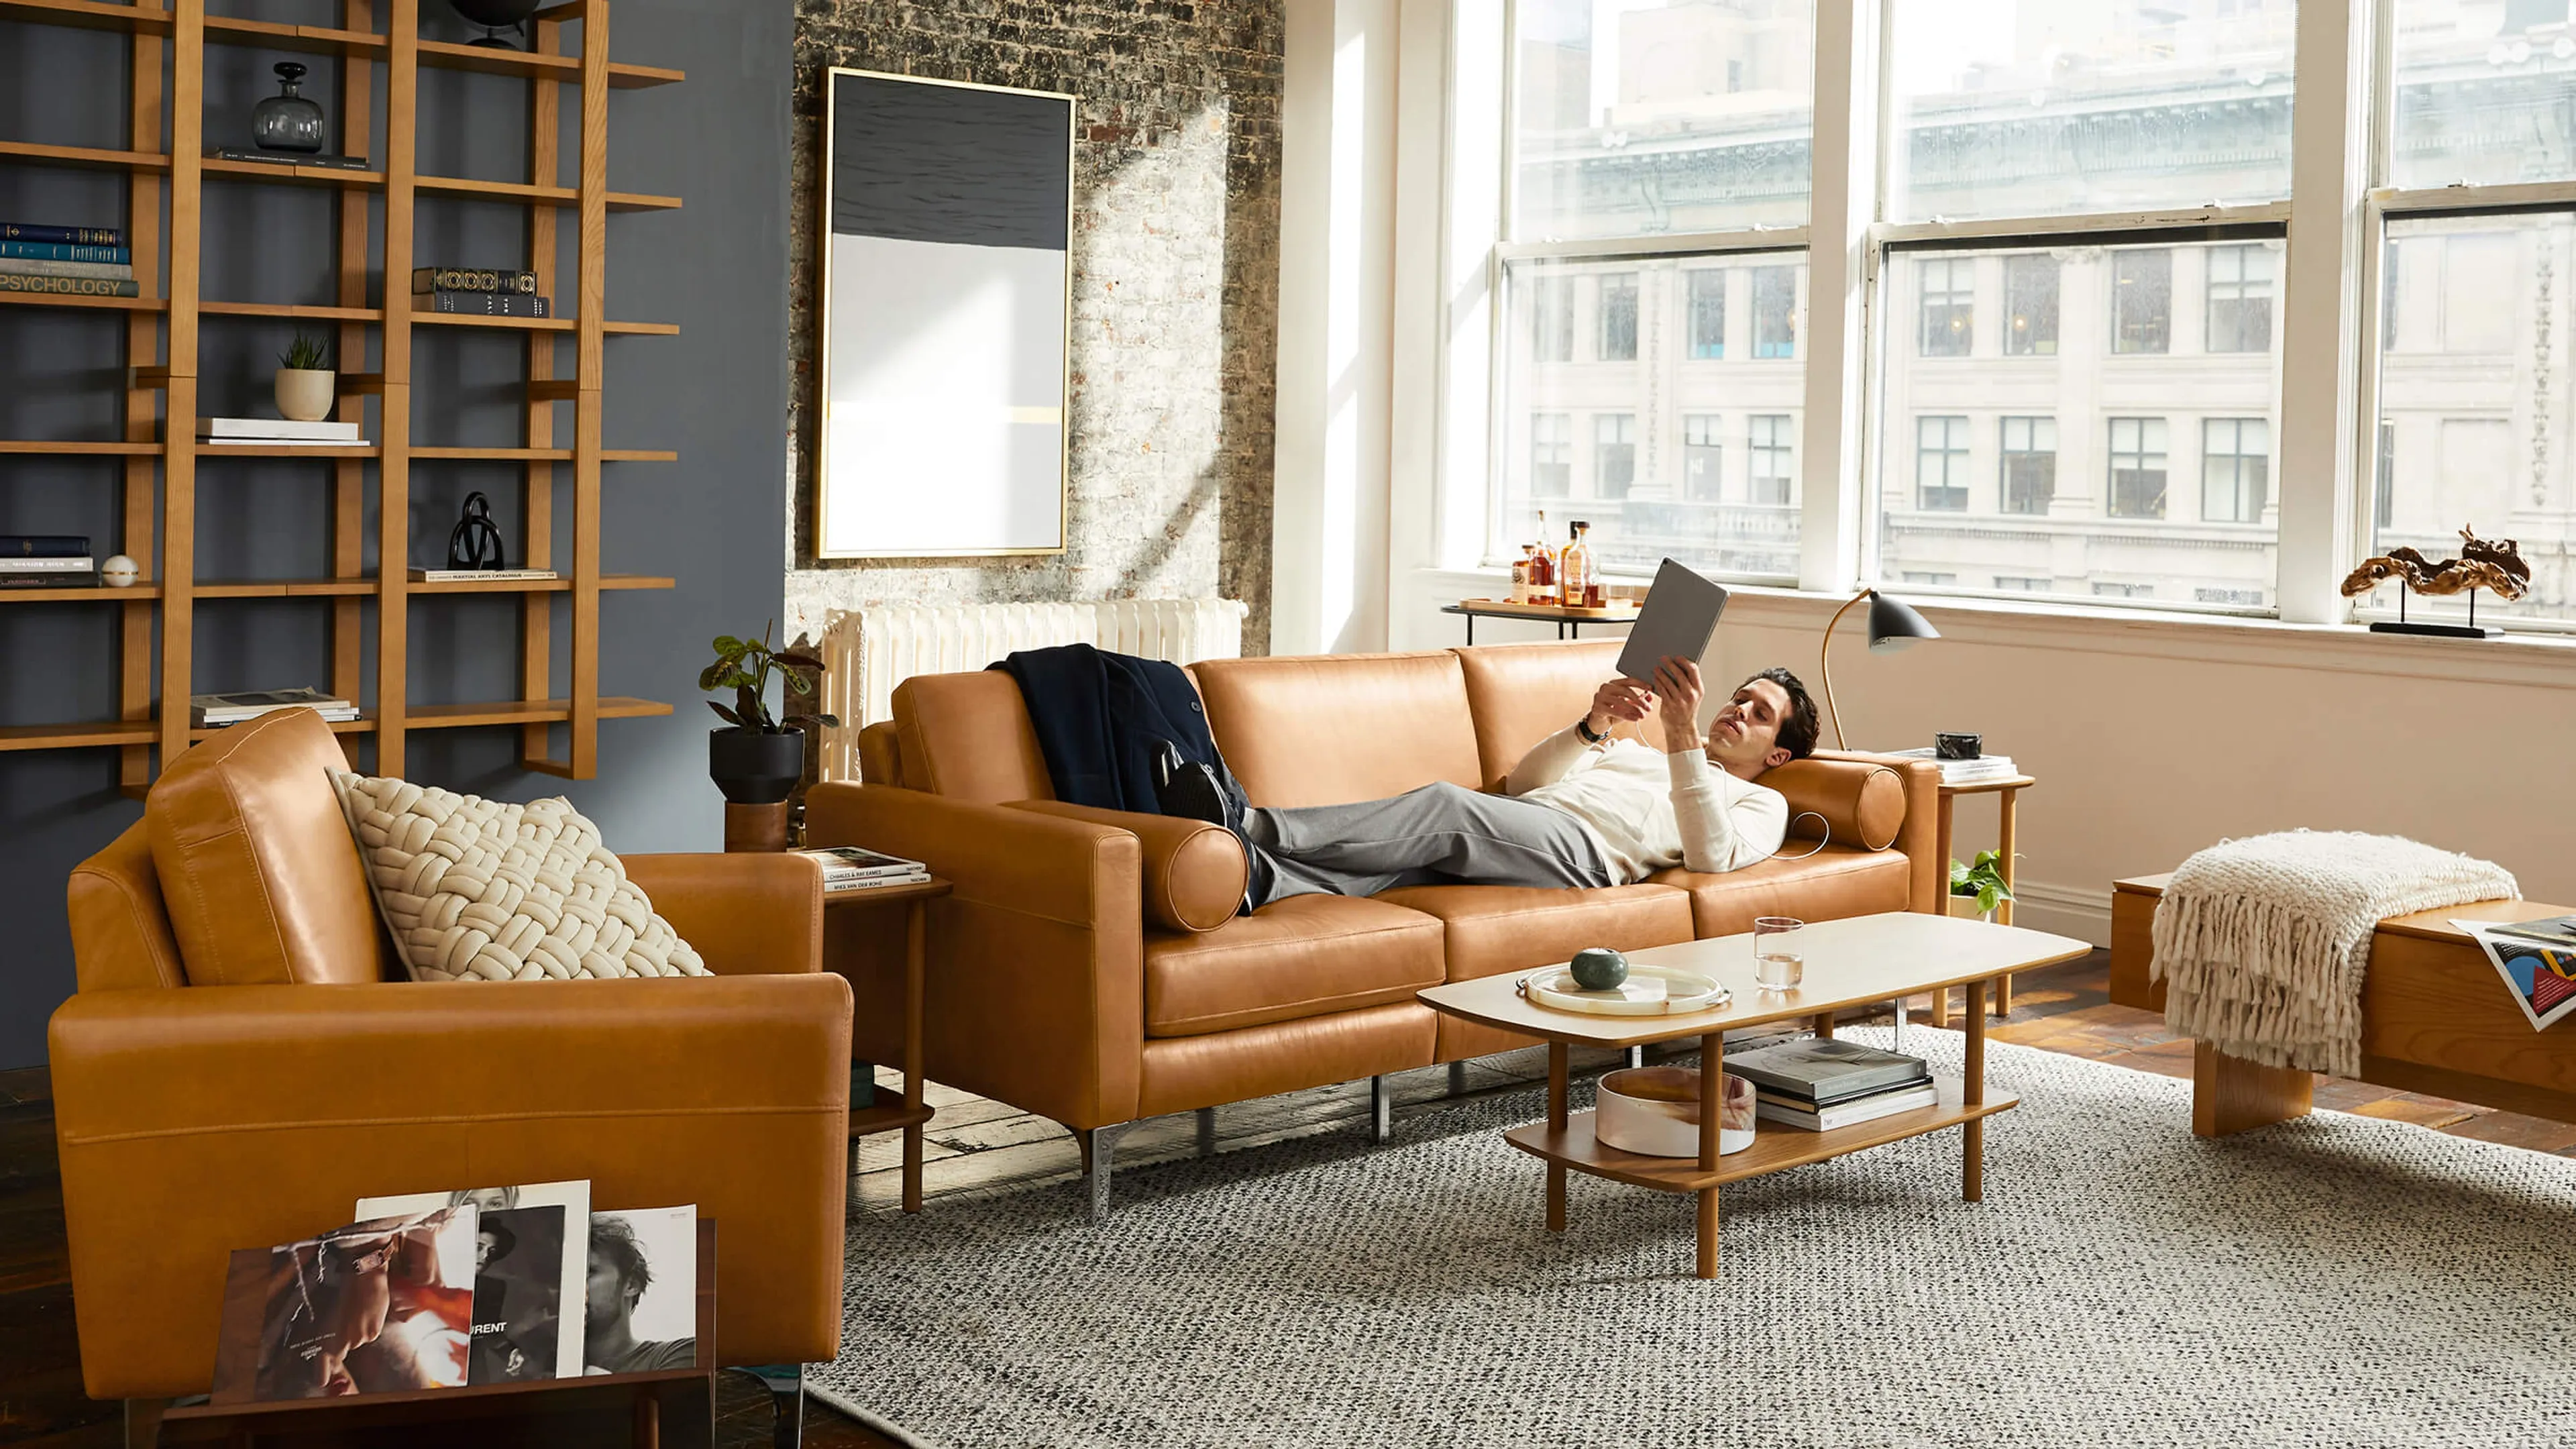 Original Nomad King Sofa with Ottoman in Chestnut Leather